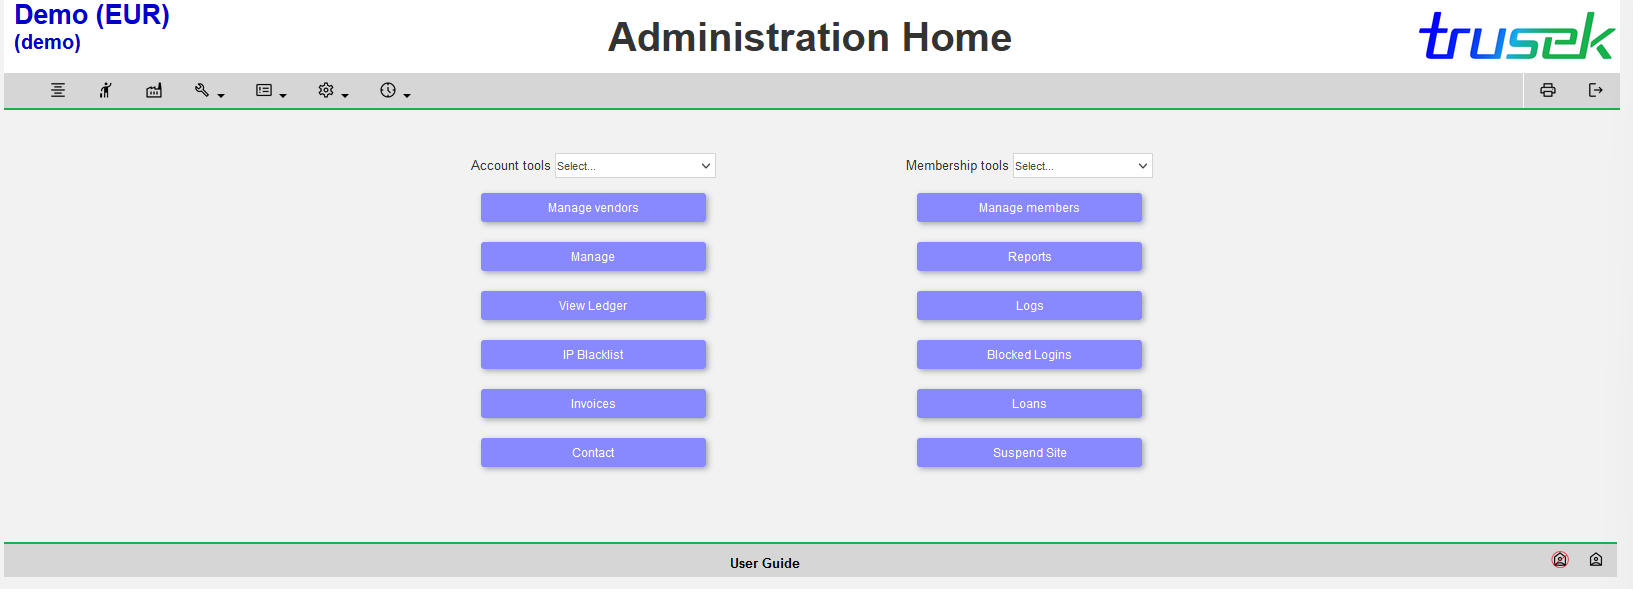 Administration Interface. A comprehensive back end management system to fully configure account programmes, business and individual users.